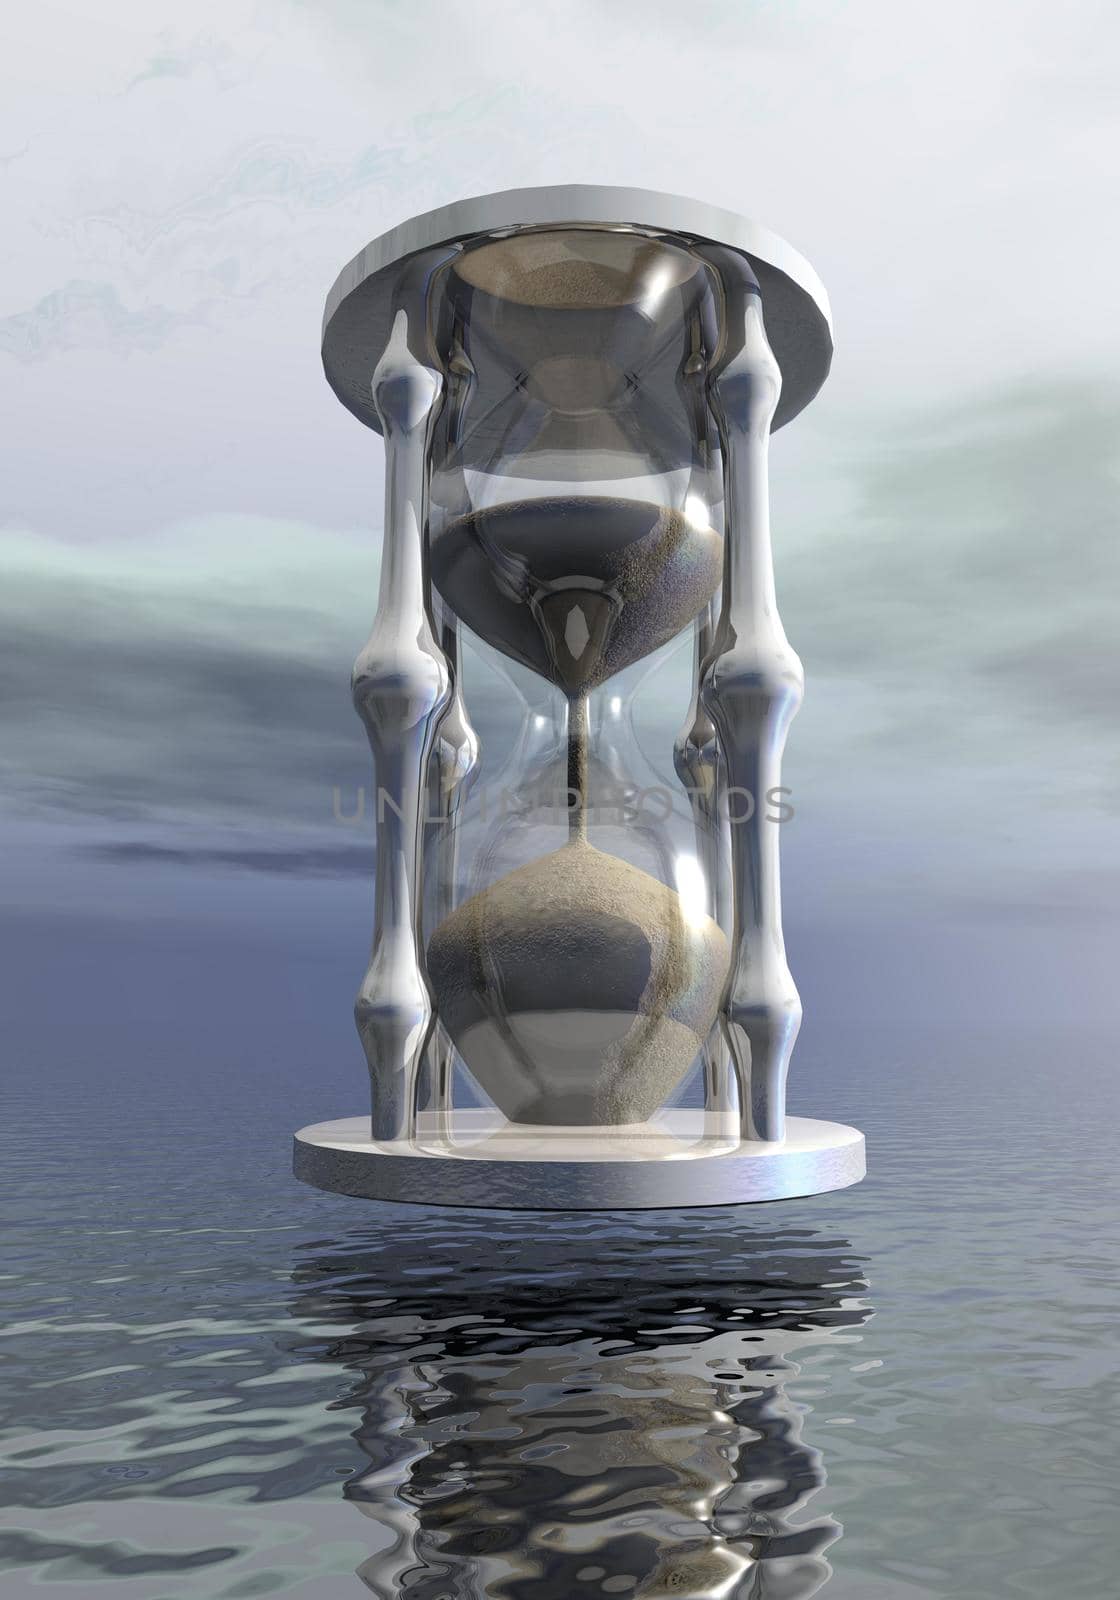 Big hourglass upon water by morning light - 3D render